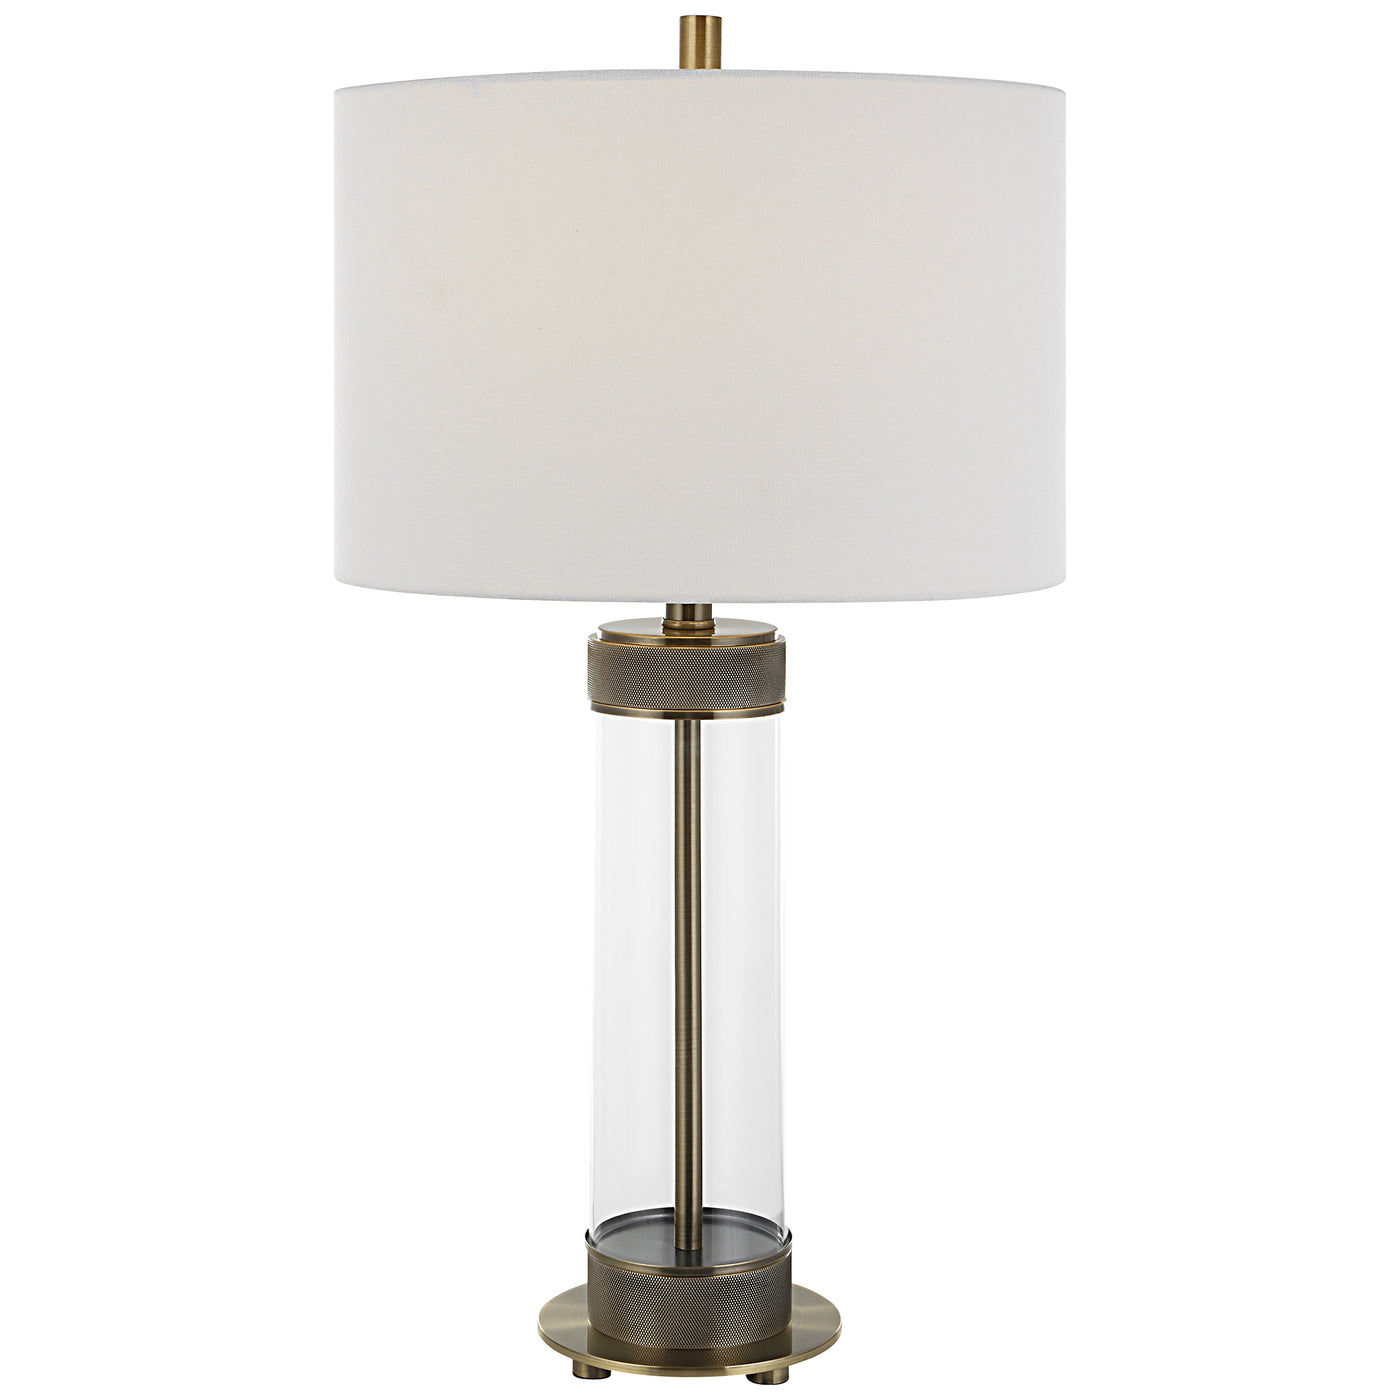 The Paris - Antique Brass Table Lamp With Glass Insert